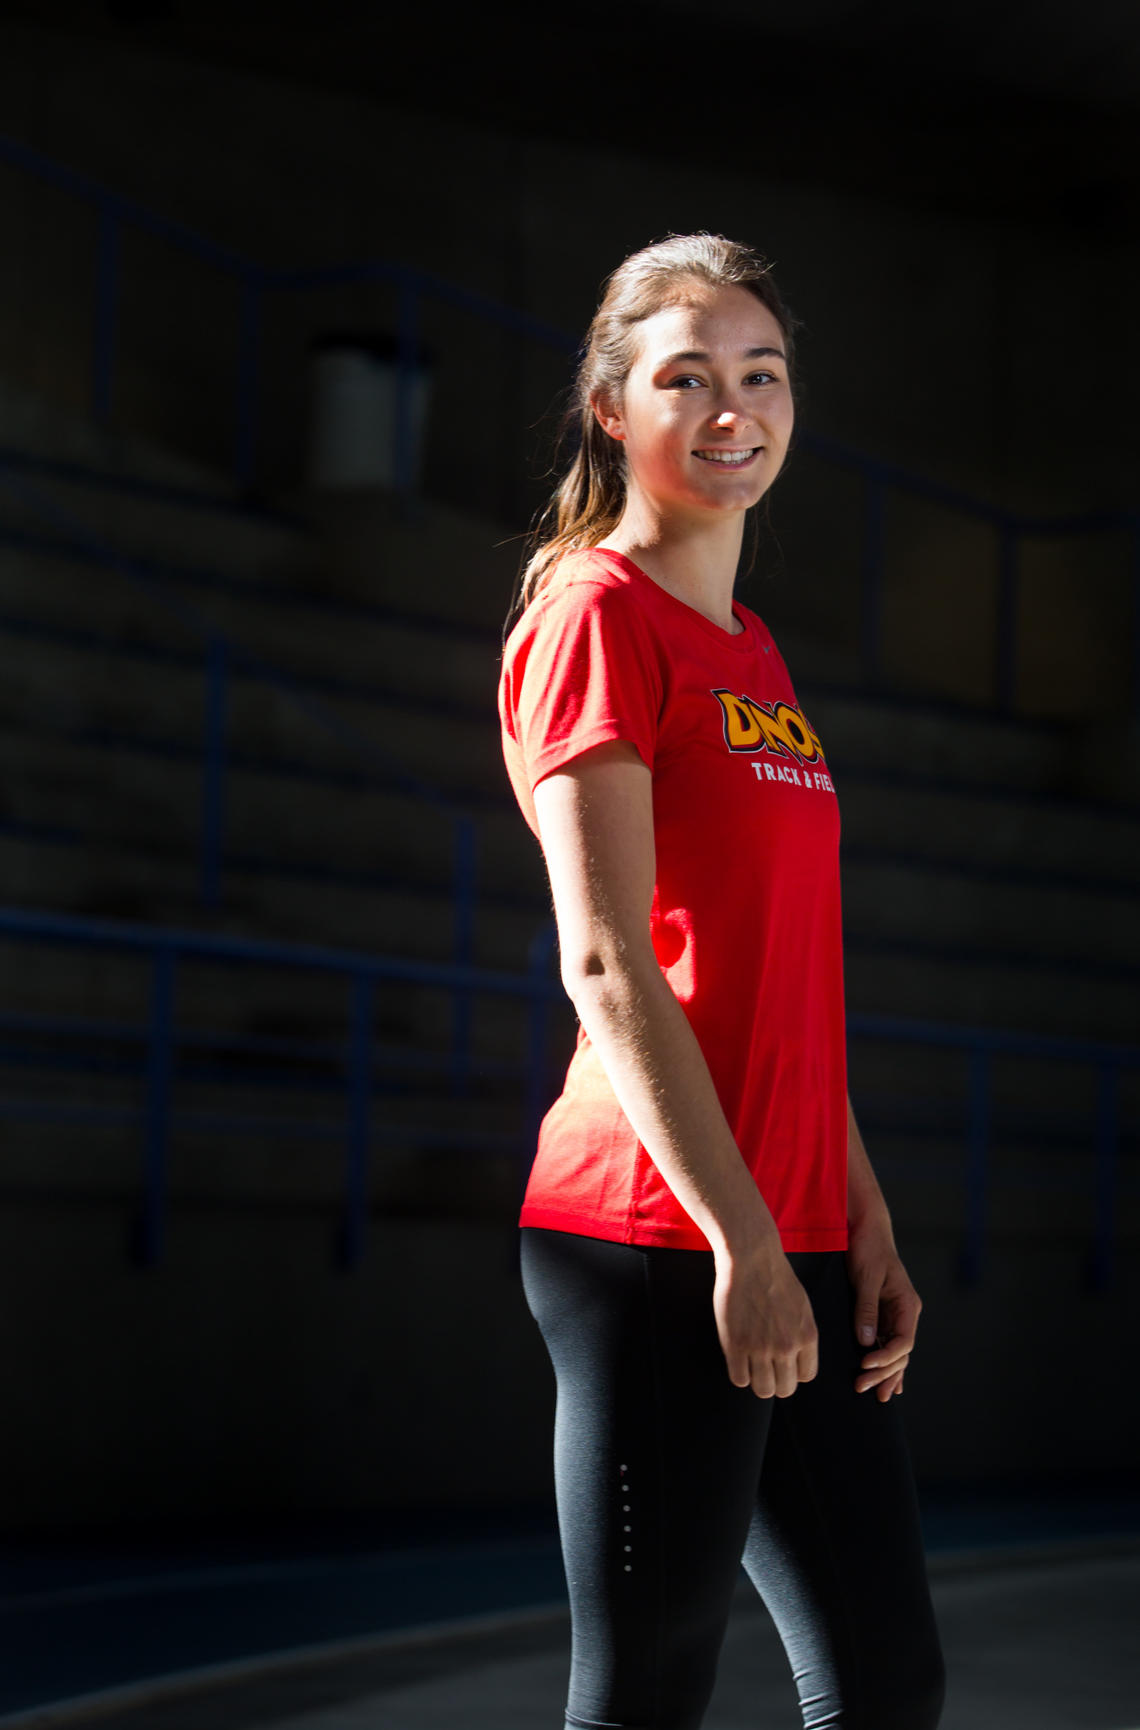 In her time at UCalgary, Jamie Kolodinsky earned athletic honours including a Canada Games silver medal, and three medals at the Western Canada Summer Games.